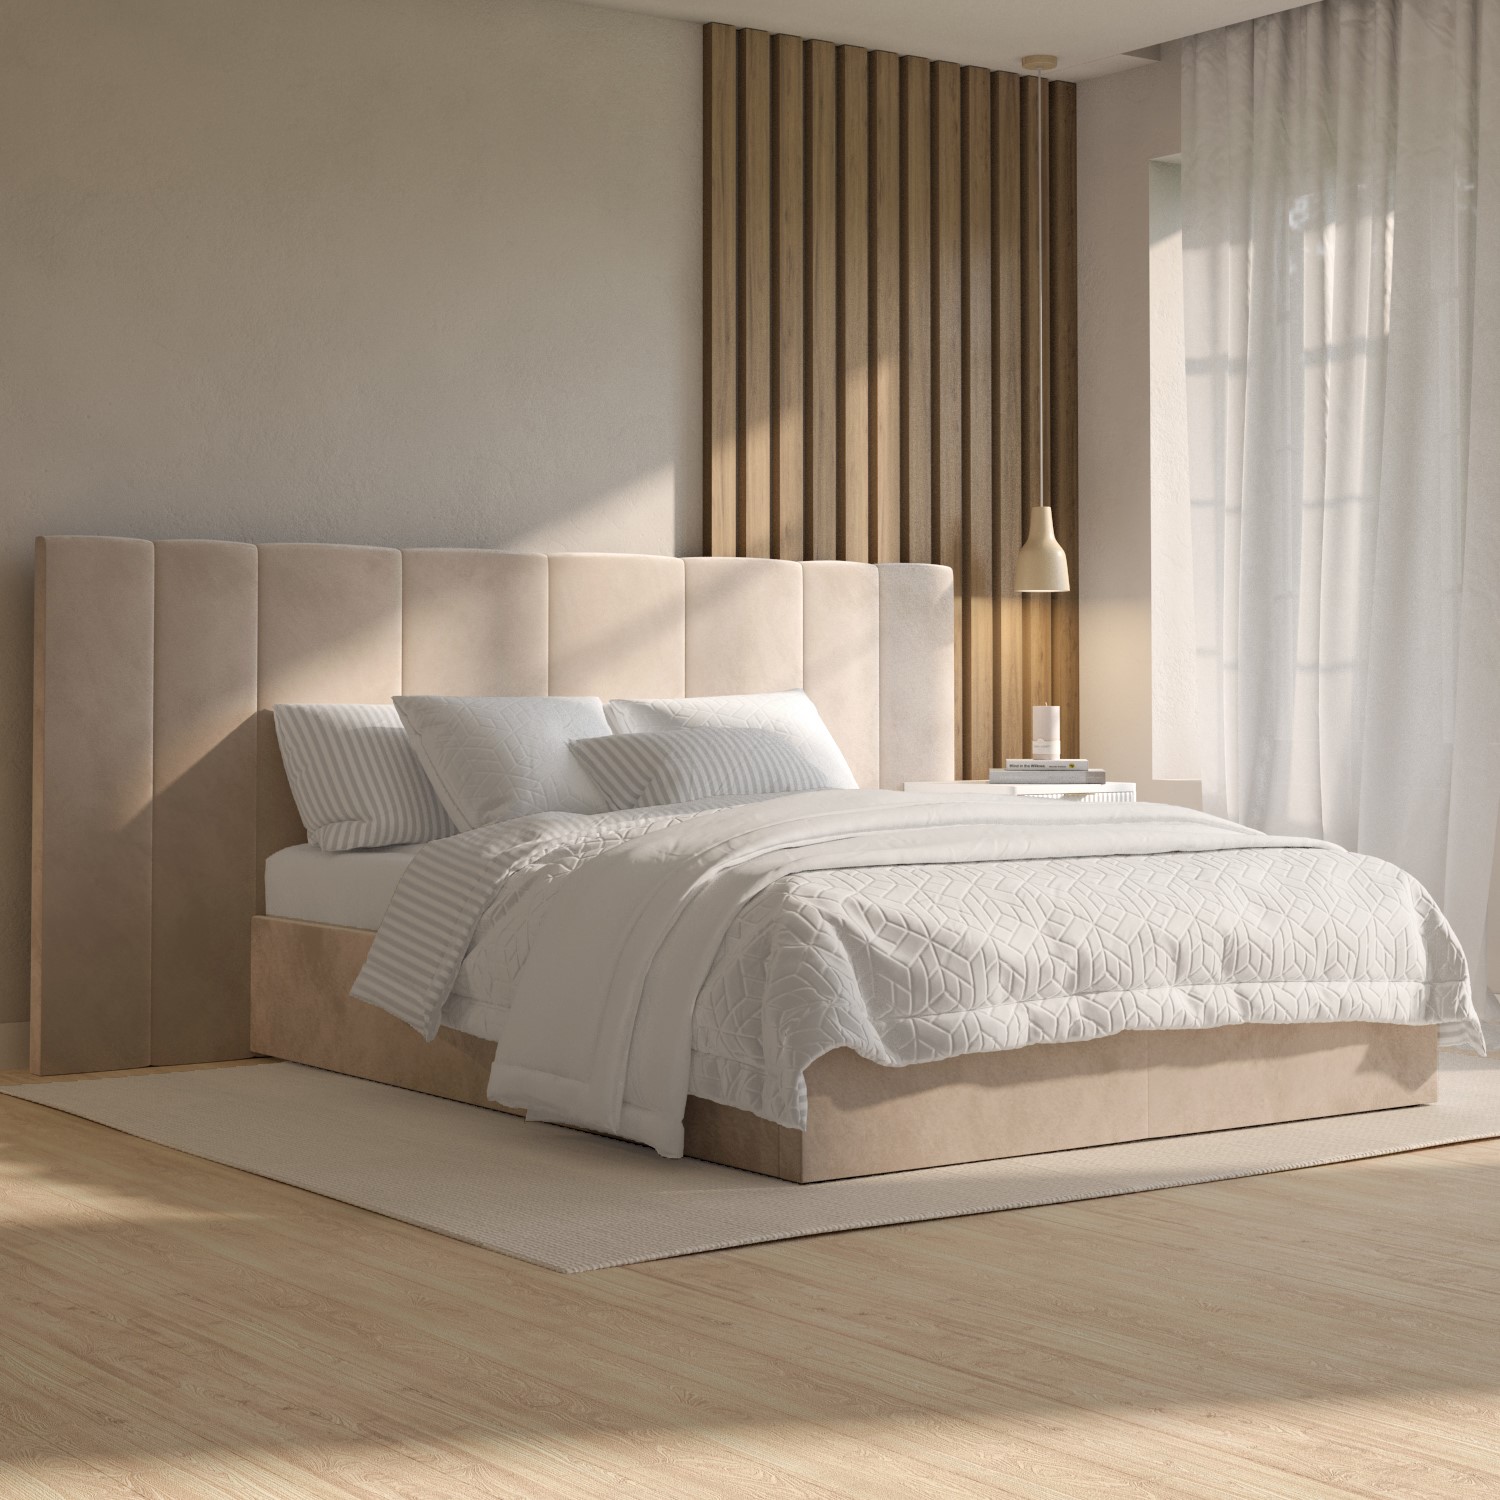 Read more about Beige velvet king size ottoman bed with wide headboard iman